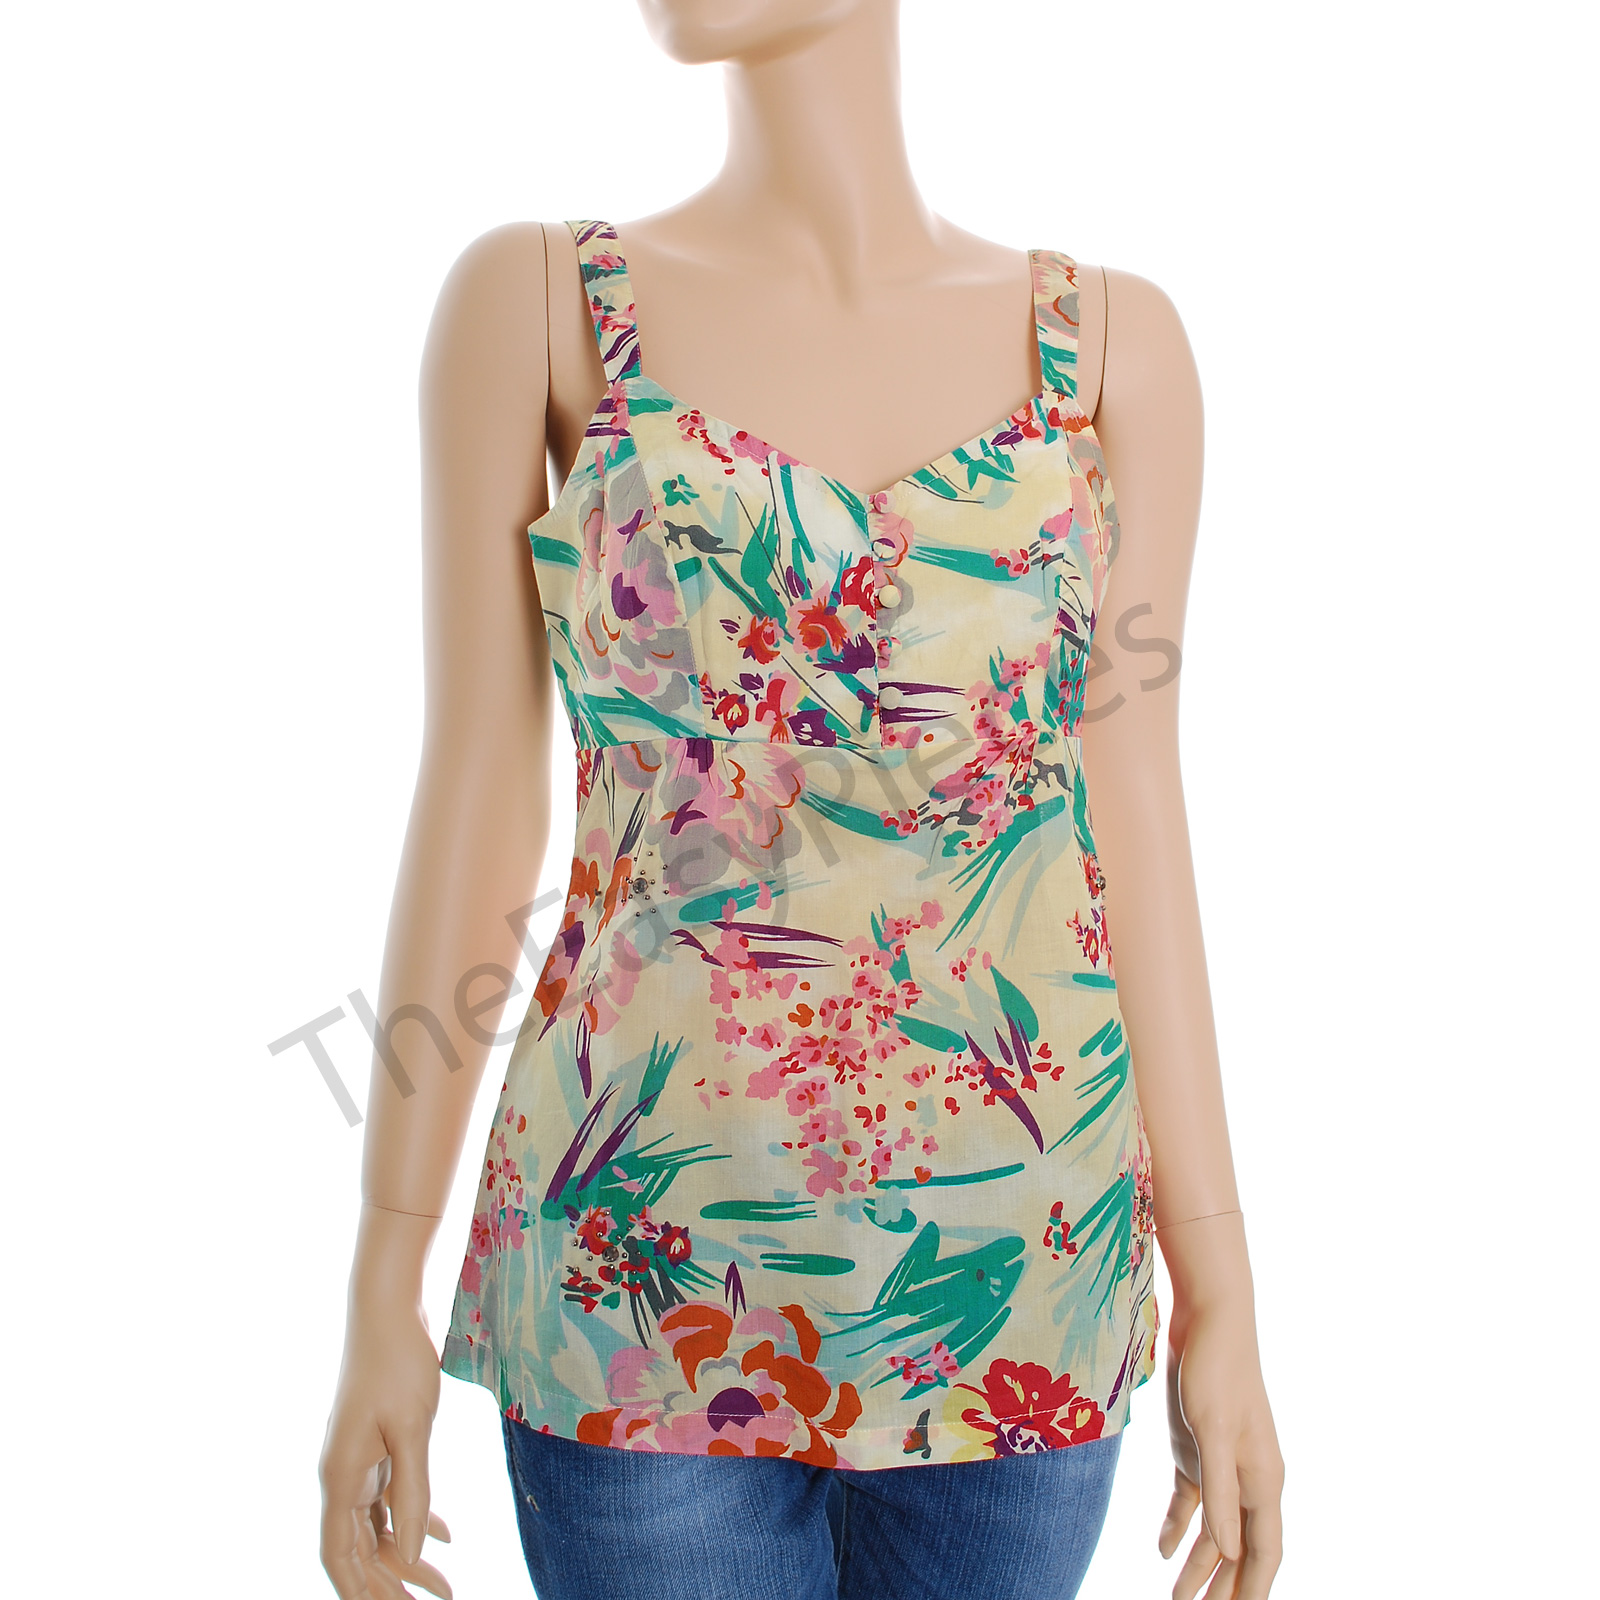 NEW Cream Turquoise Cotton Floral Camisole Cami Top ~Various Sizes | eBay